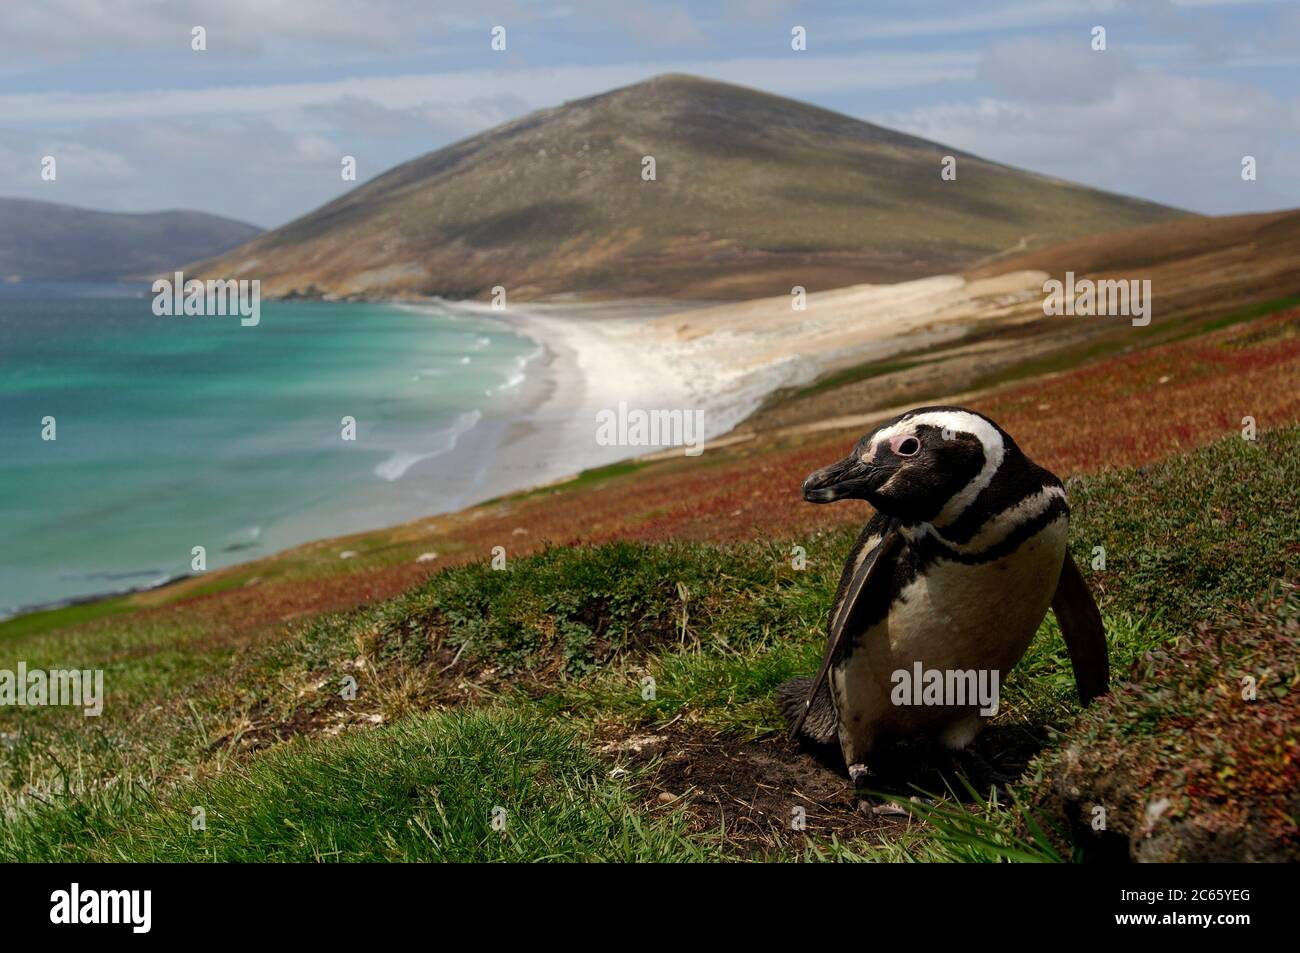 During the reproduction period the Magellanic penguin (Spheniscus magellanicus) can be found on coasts with soft soil where it breeds in burrows excavated by itself. Stock Photo